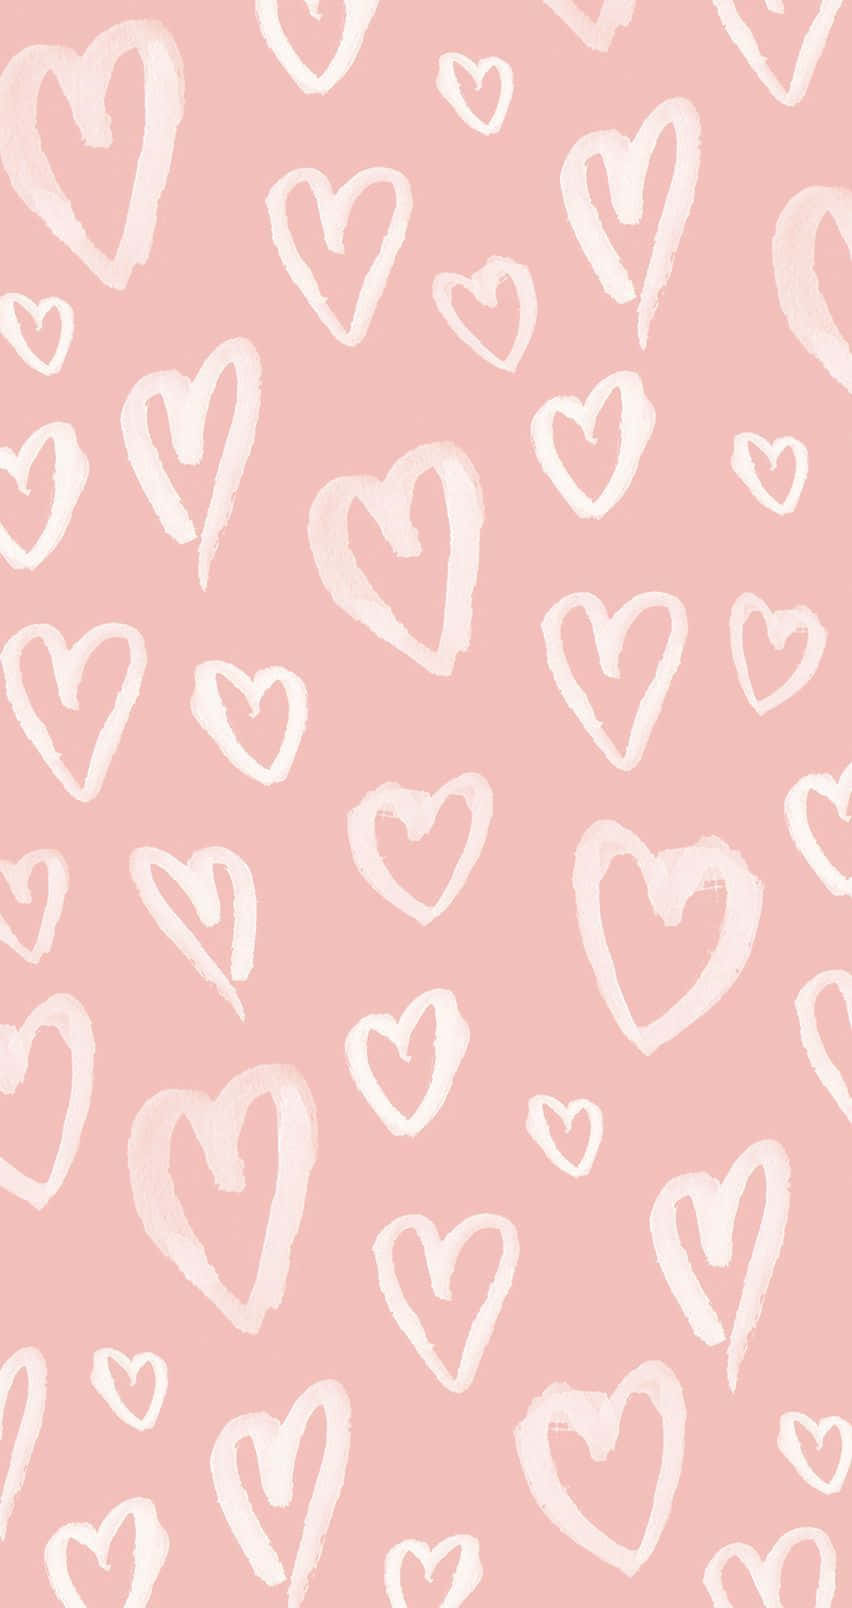 Pretty Pastel Pink Hearts Iphone Wallpaper